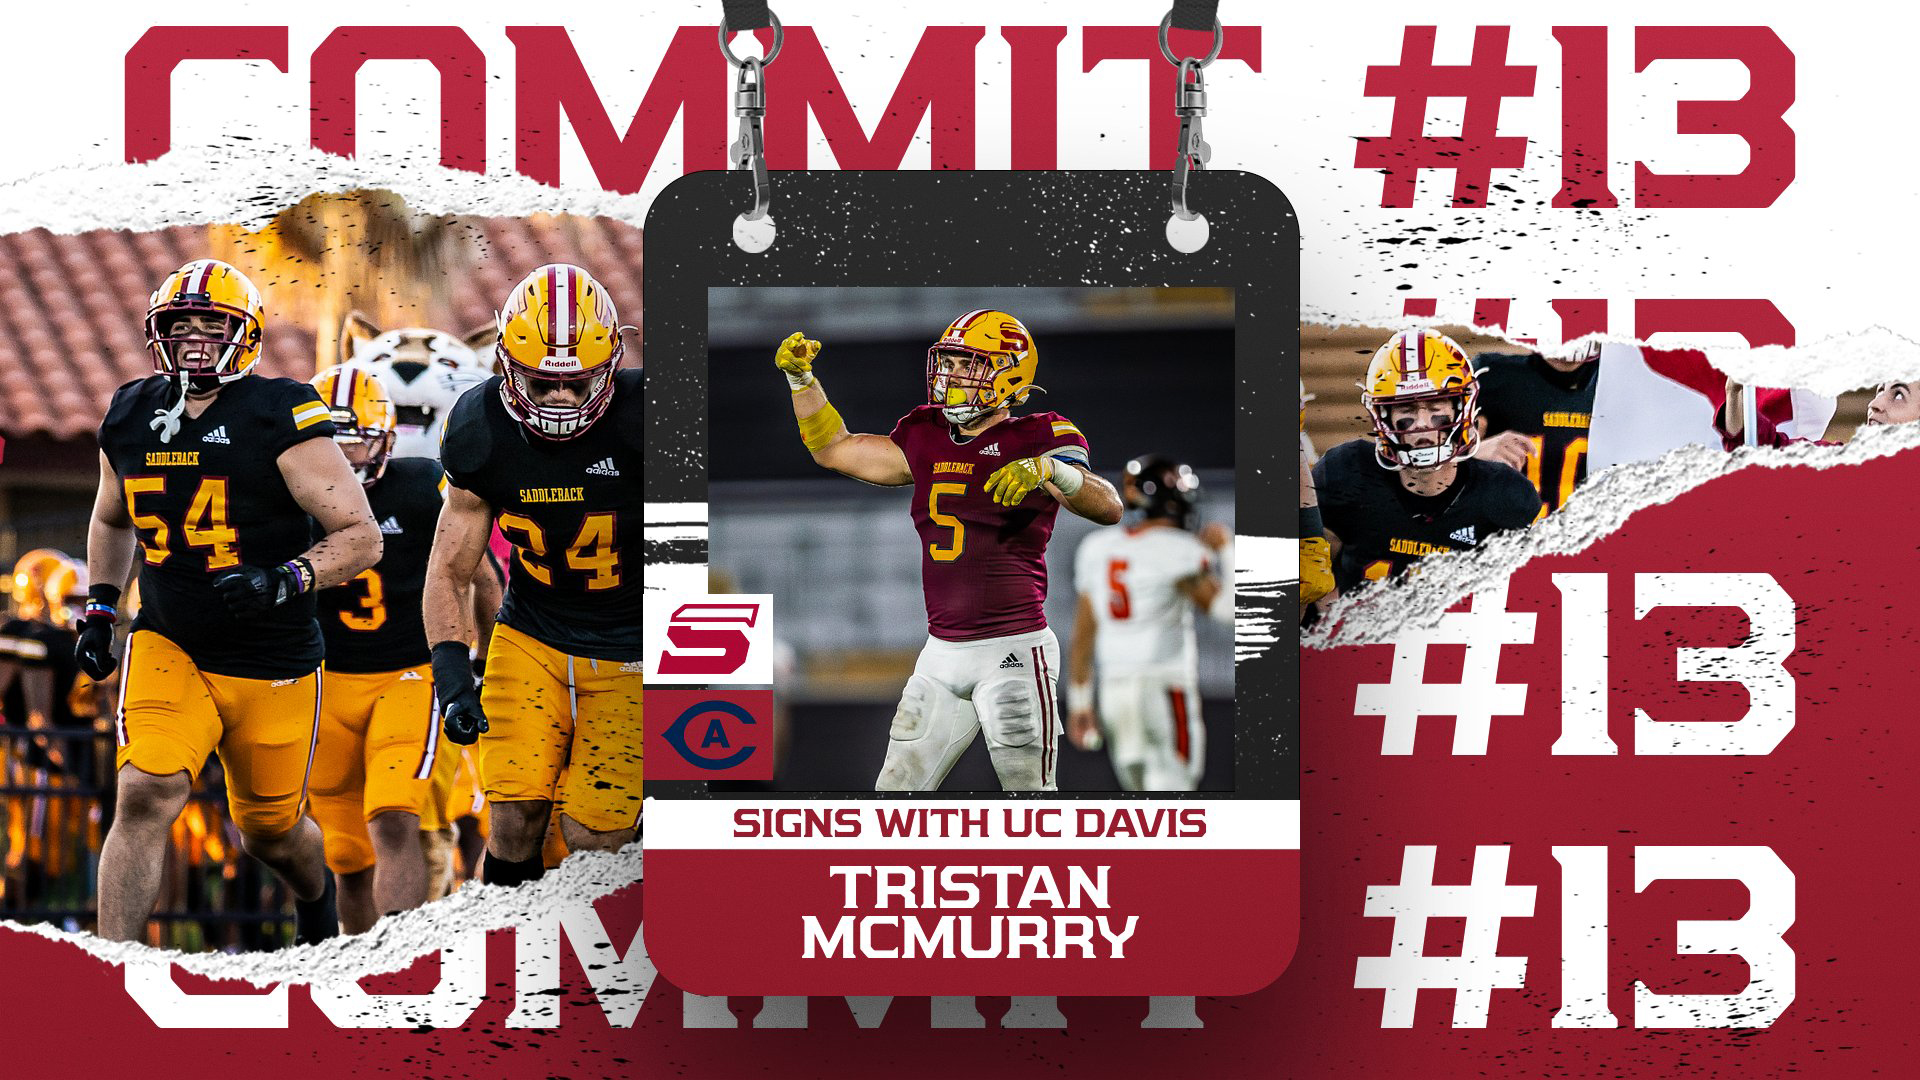 McMurry makes it 13 commits